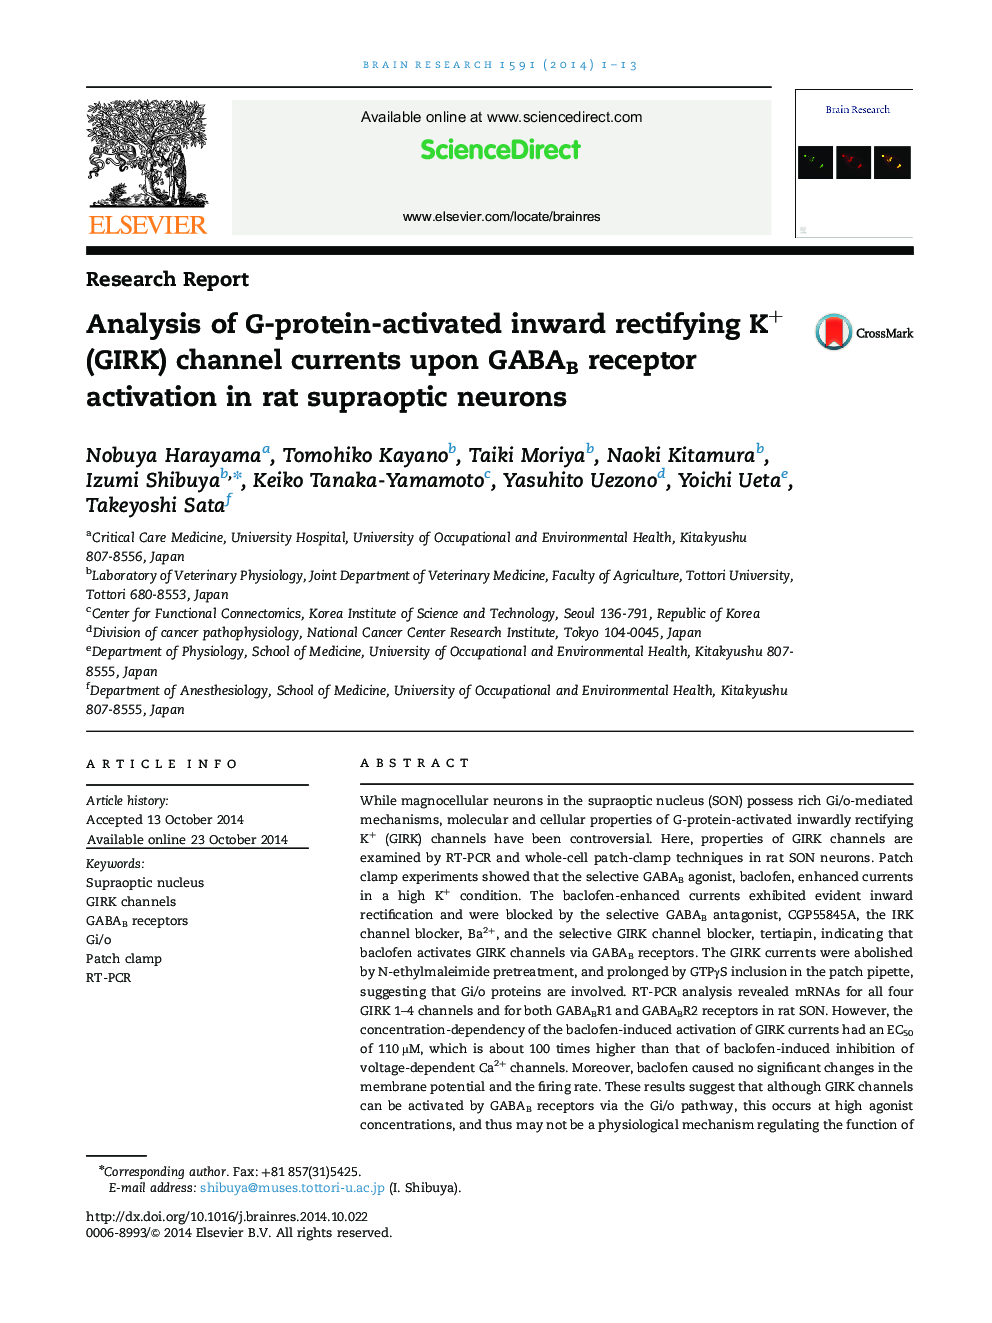 Analysis of G-protein-activated inward rectifying K+ (GIRK) channel currents upon GABAB receptor activation in rat supraoptic neurons